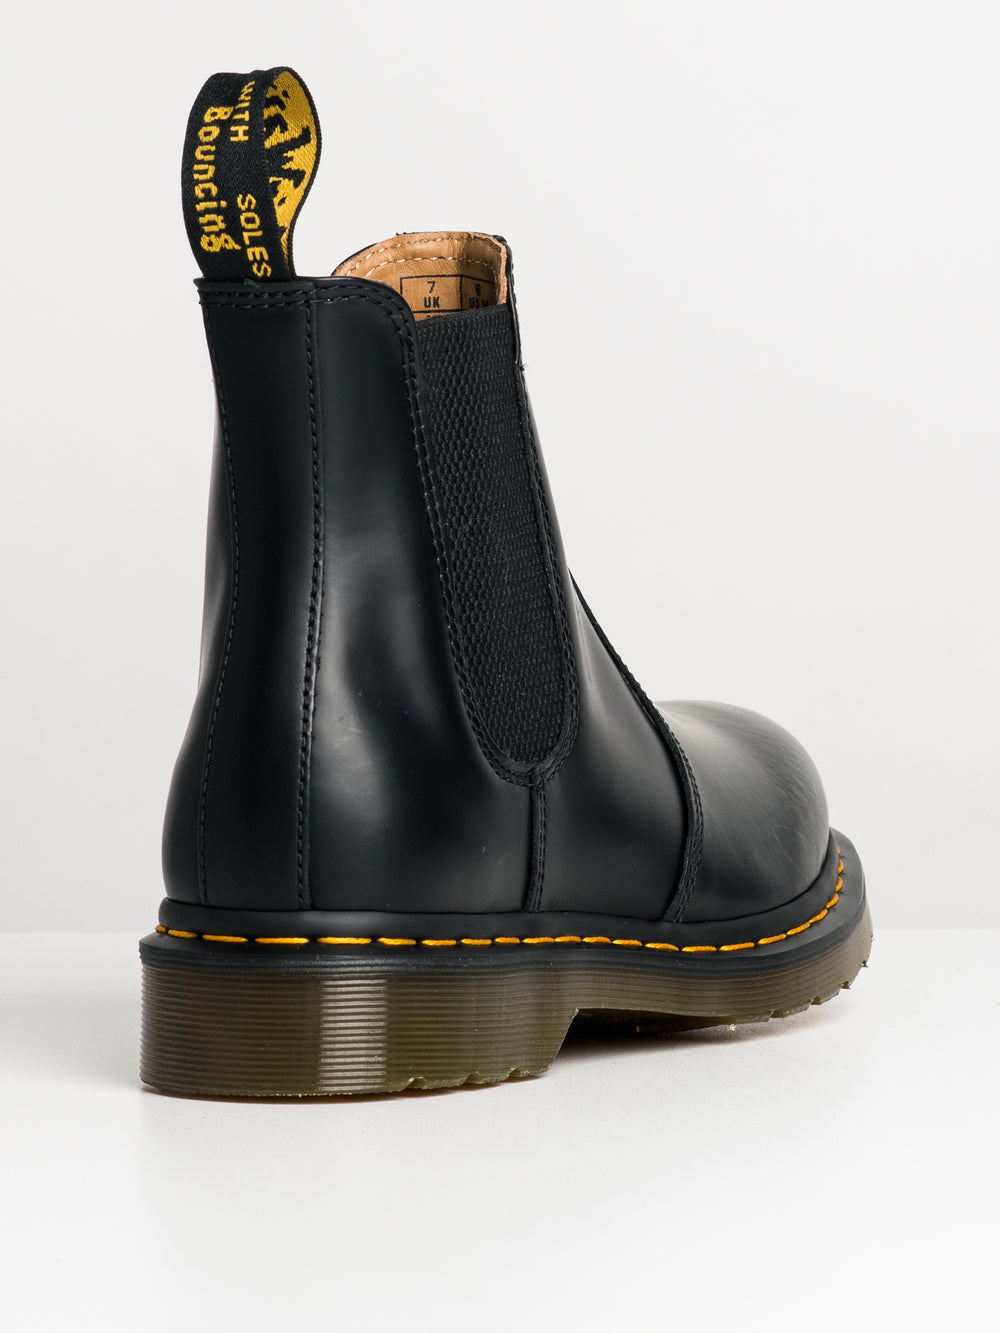 MENS DR MARTENS 2976 YELLOW STITCH BOOT - CLEARANCE